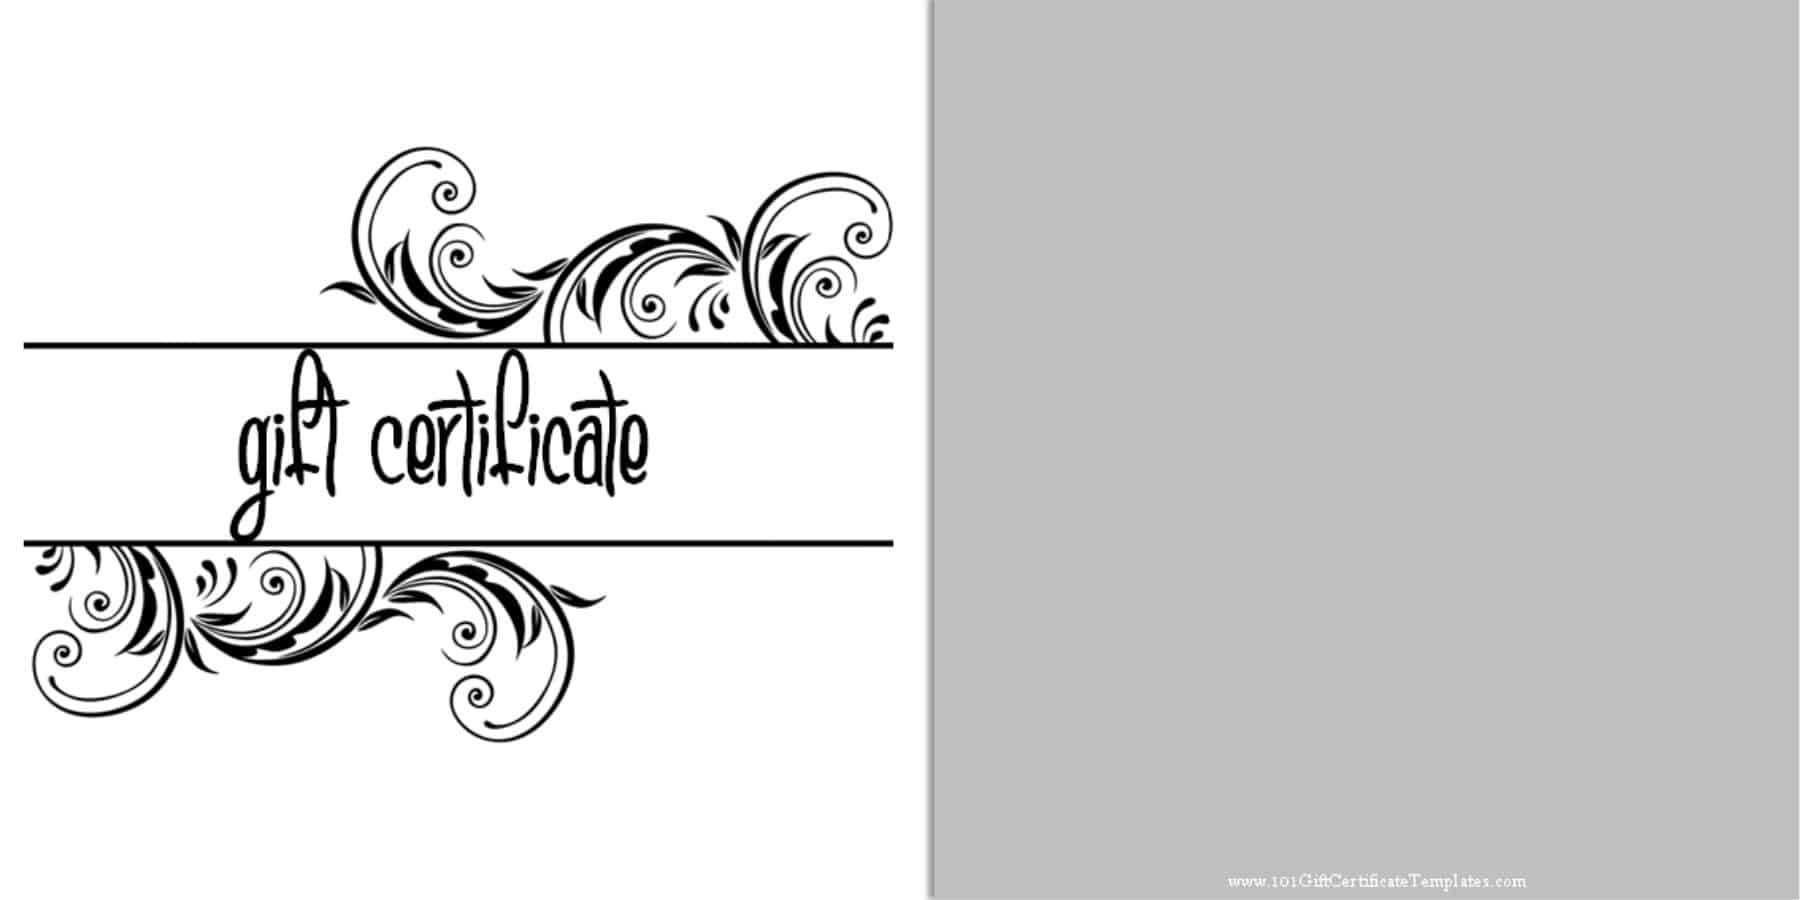 Printable Gift Certificate Templates Intended For Black And White Gift Certificate Template Free